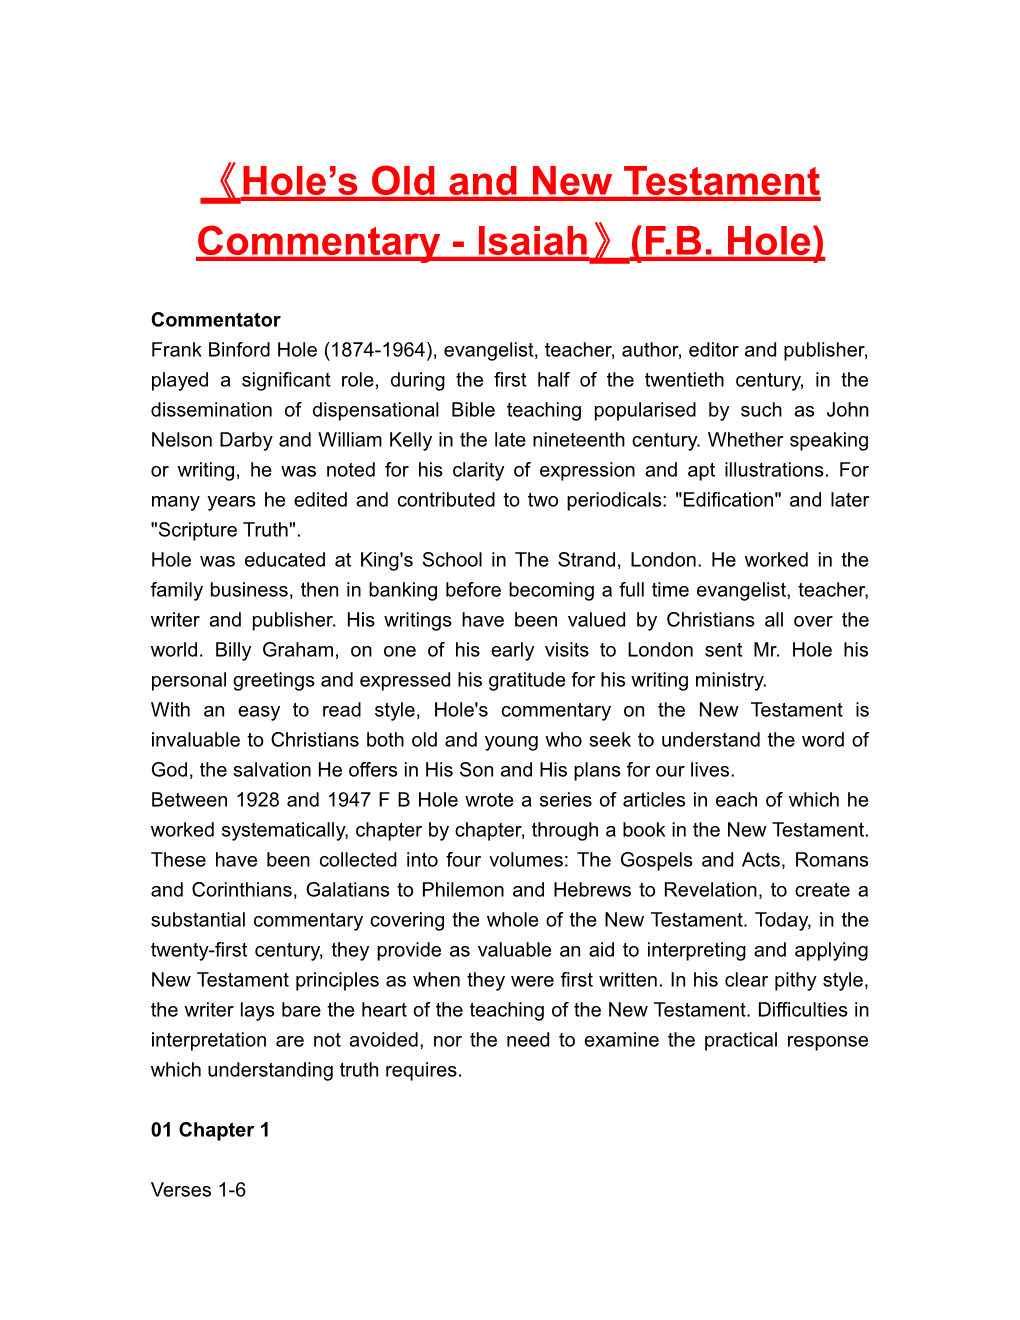 Hole S Old and New Testament Commentary - Isaiah (F.B. Hole)